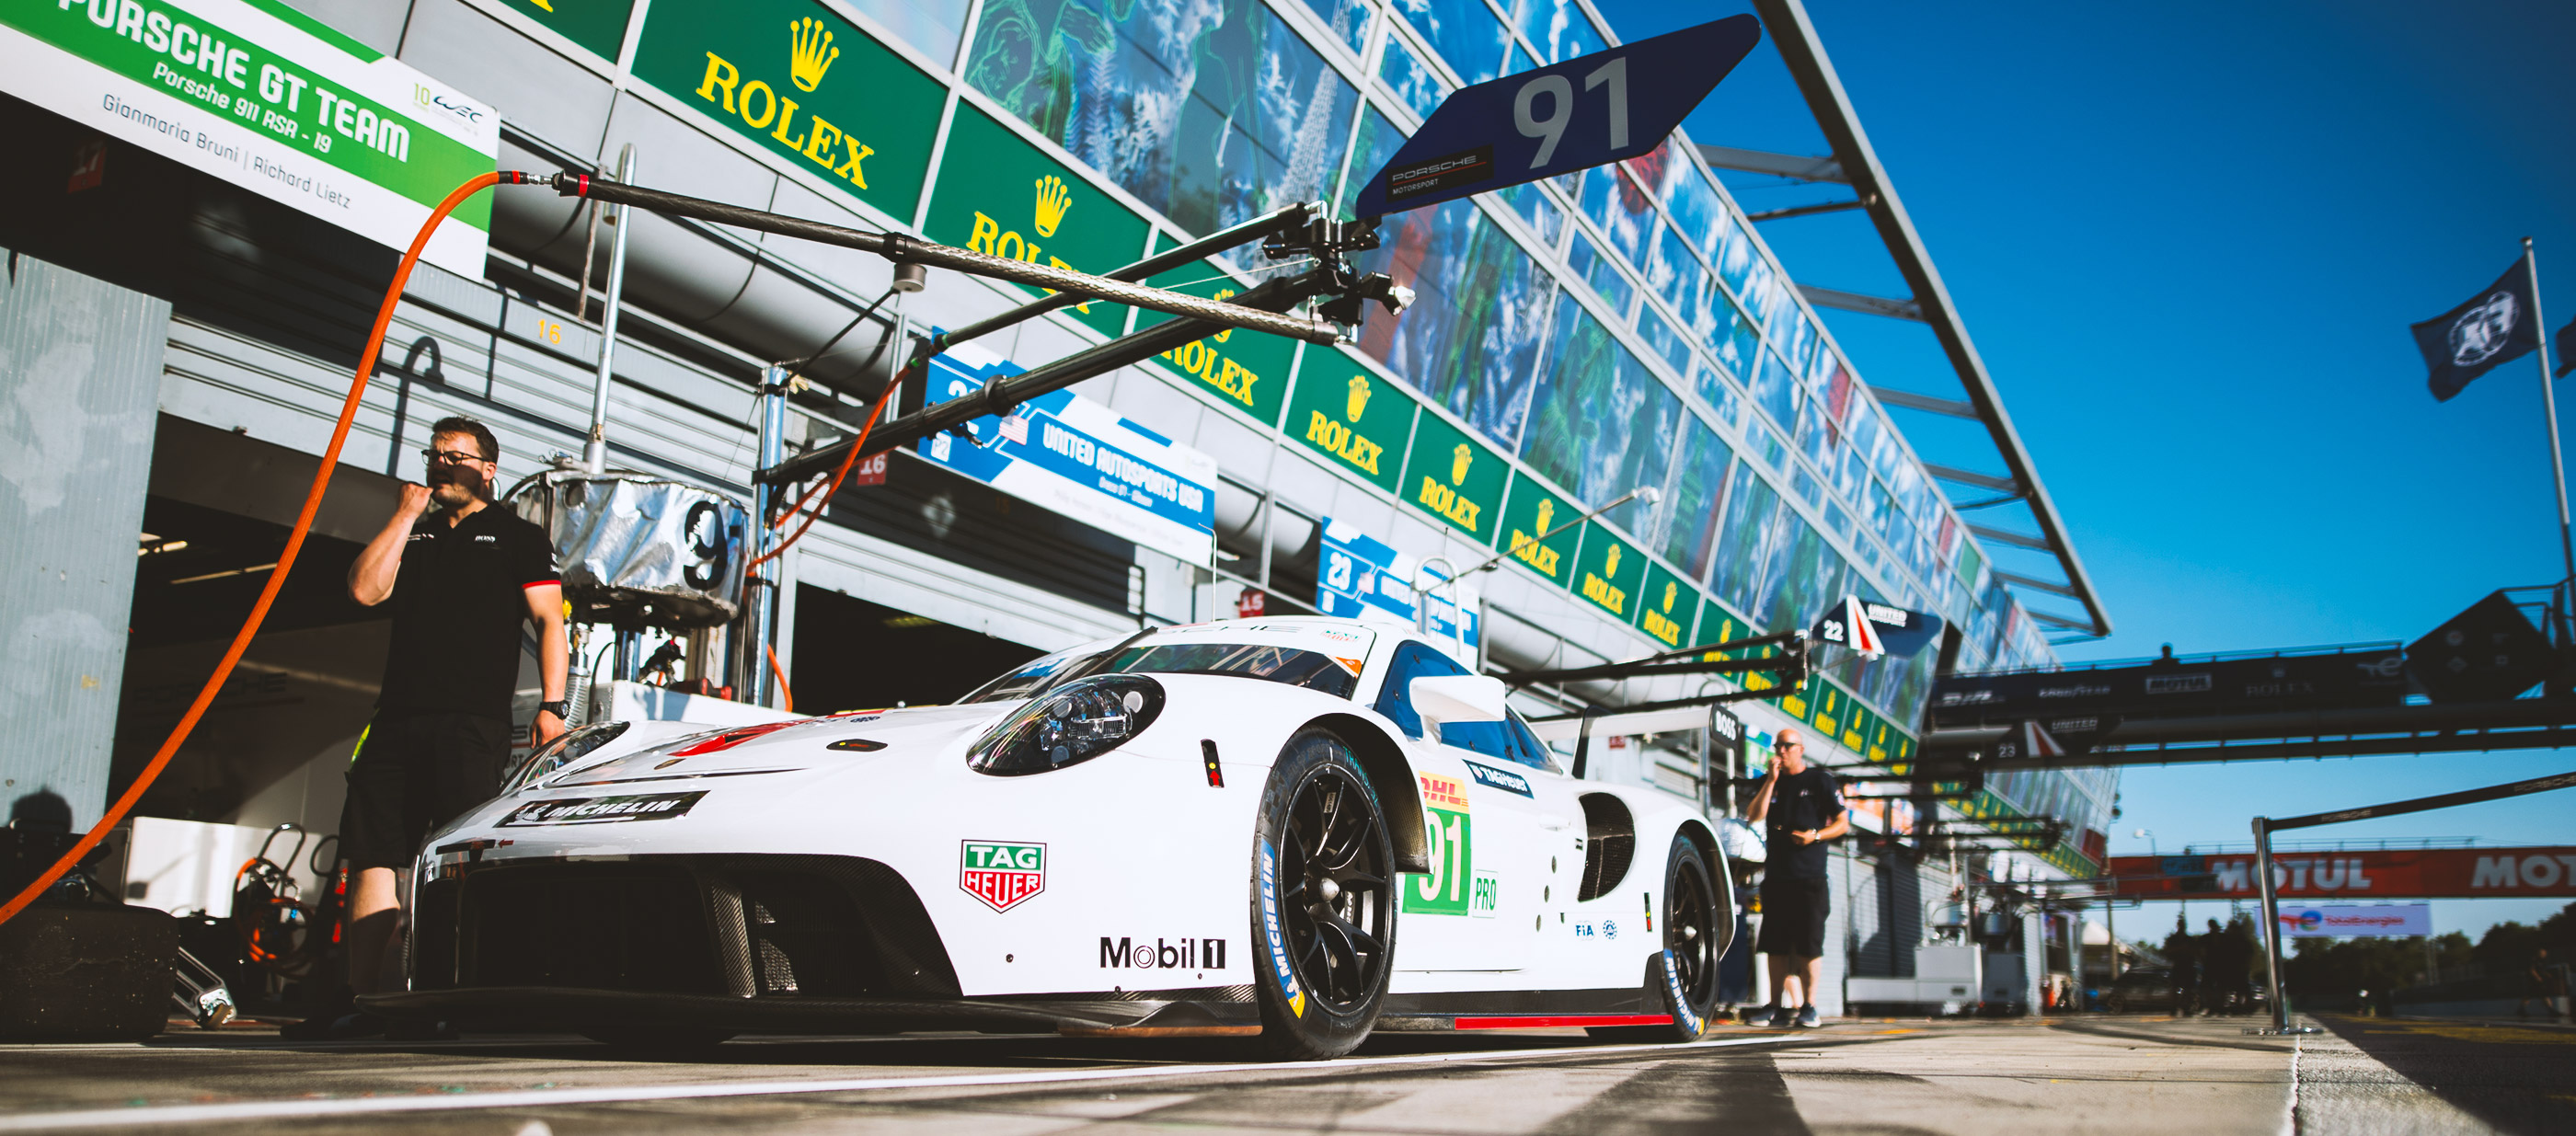 Wine residue fuelling FIA World Endurance Championship’s sustainable race to the top